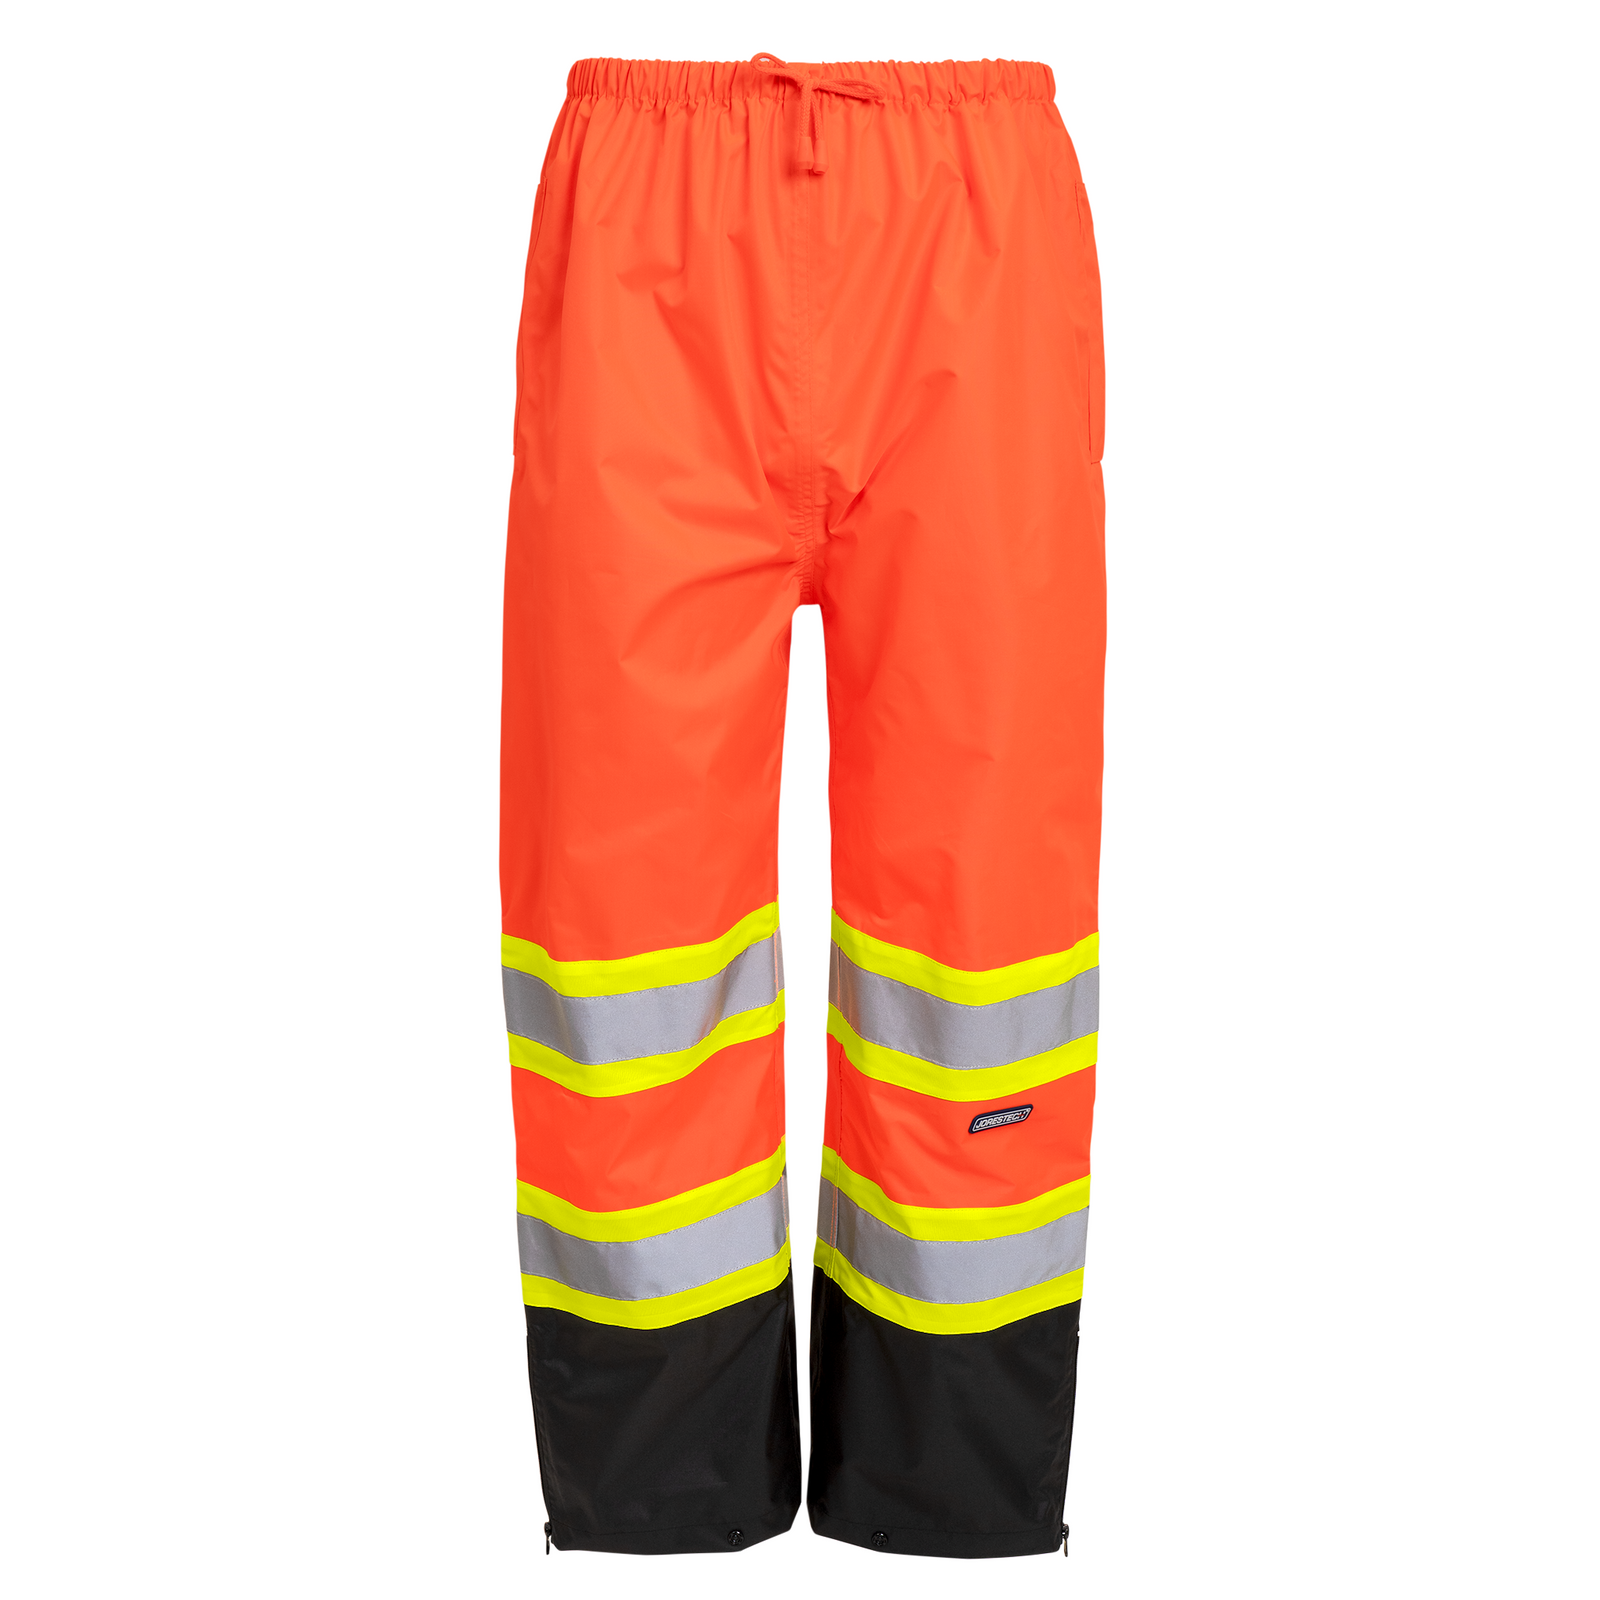 Hi vis two tone orange safety rain pants with reflective and contrasting stripes